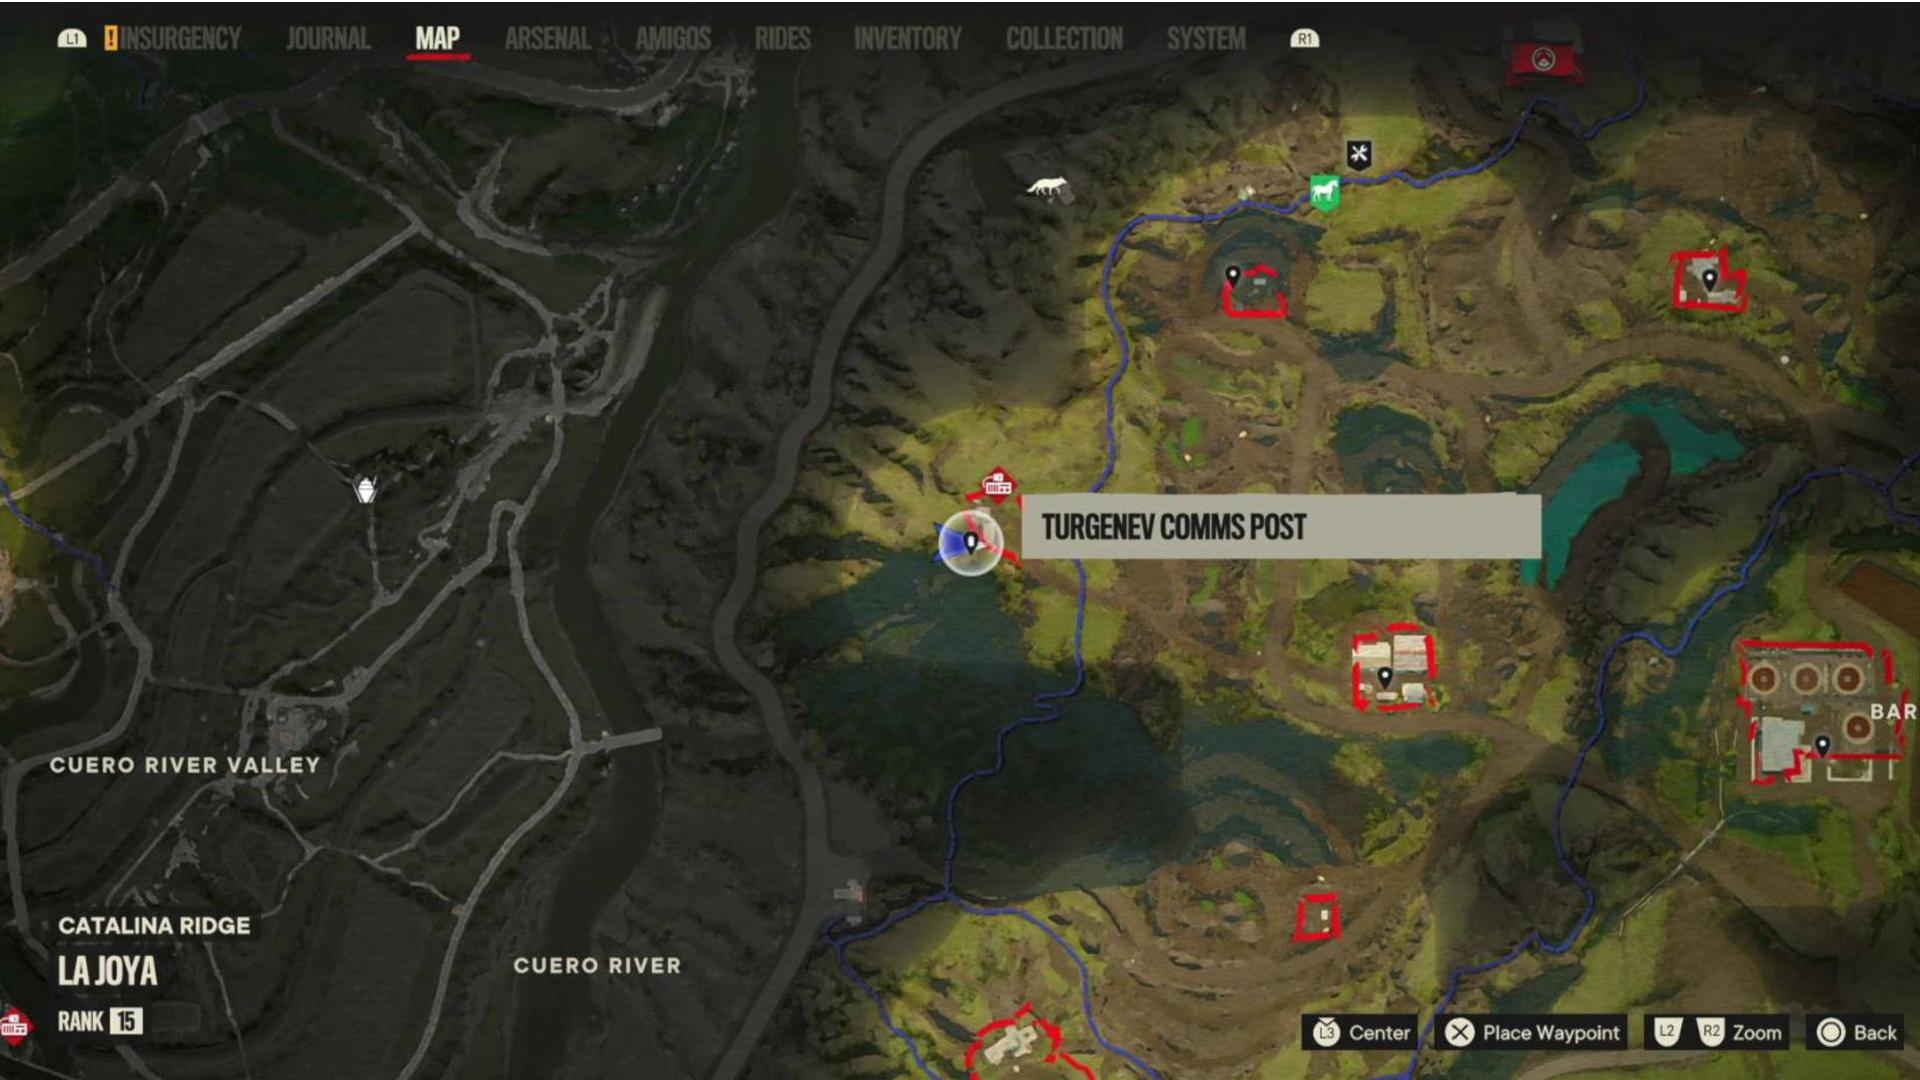 Far Cry 6 USB Stick locations: The map showcasing the location of the USB stick.